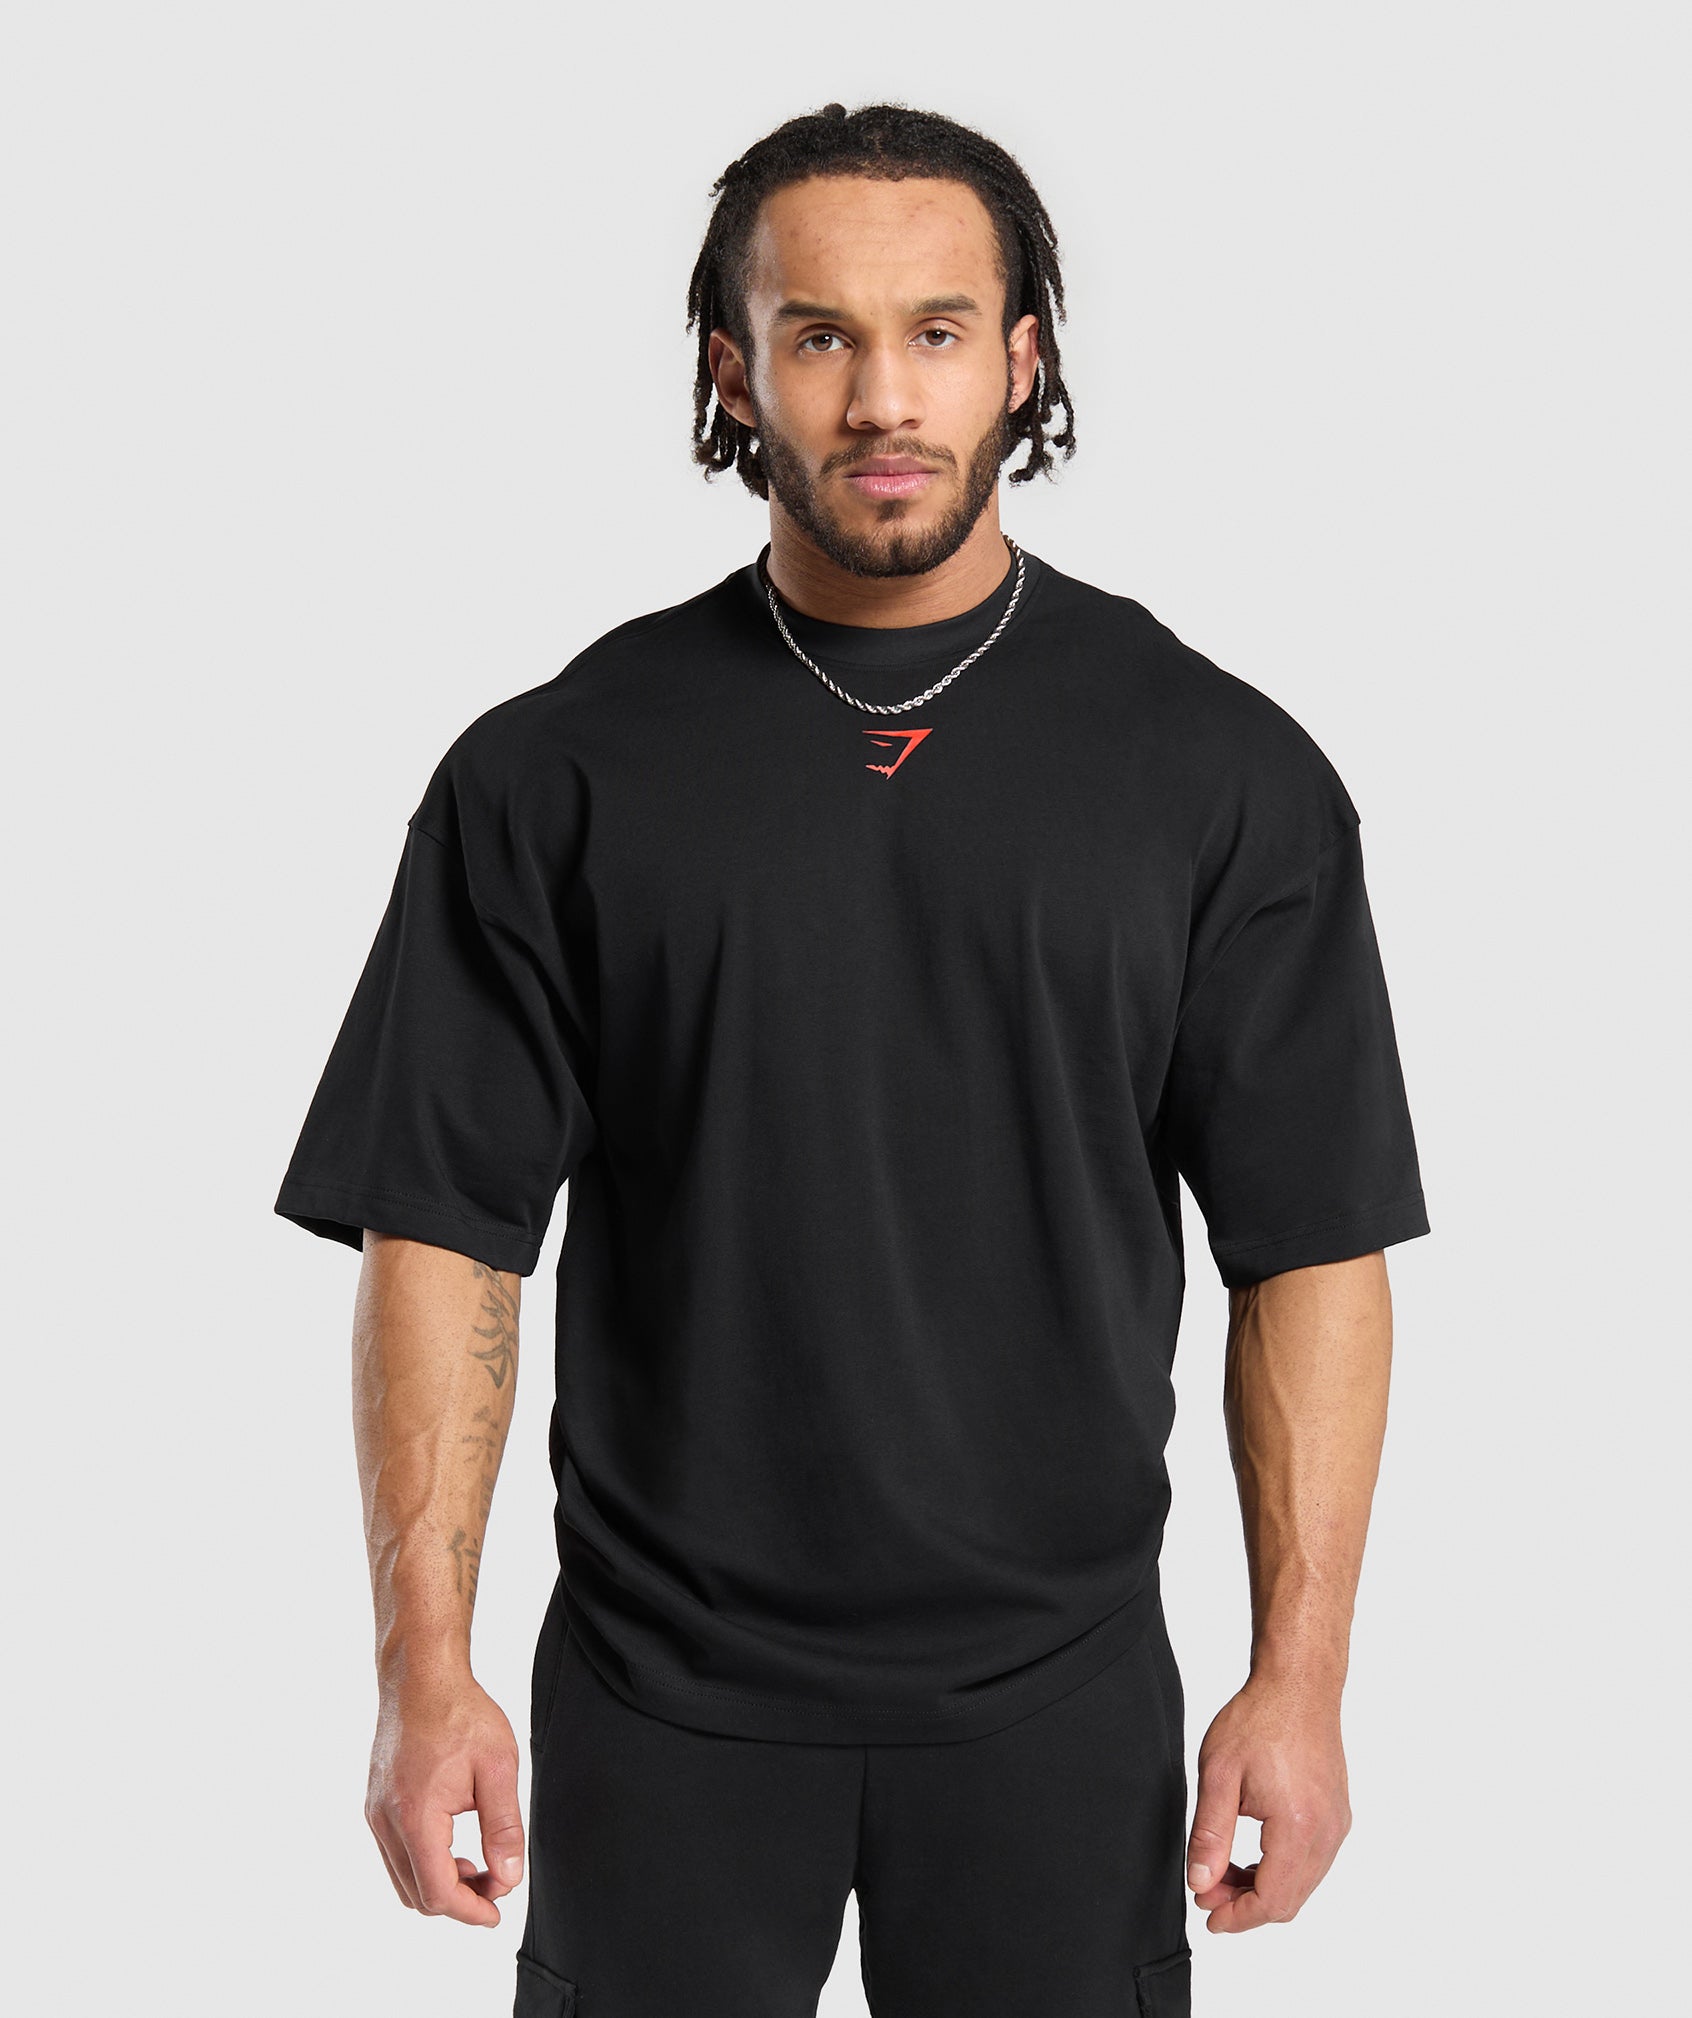 Sets N Reps T-Shirt in Black - view 2